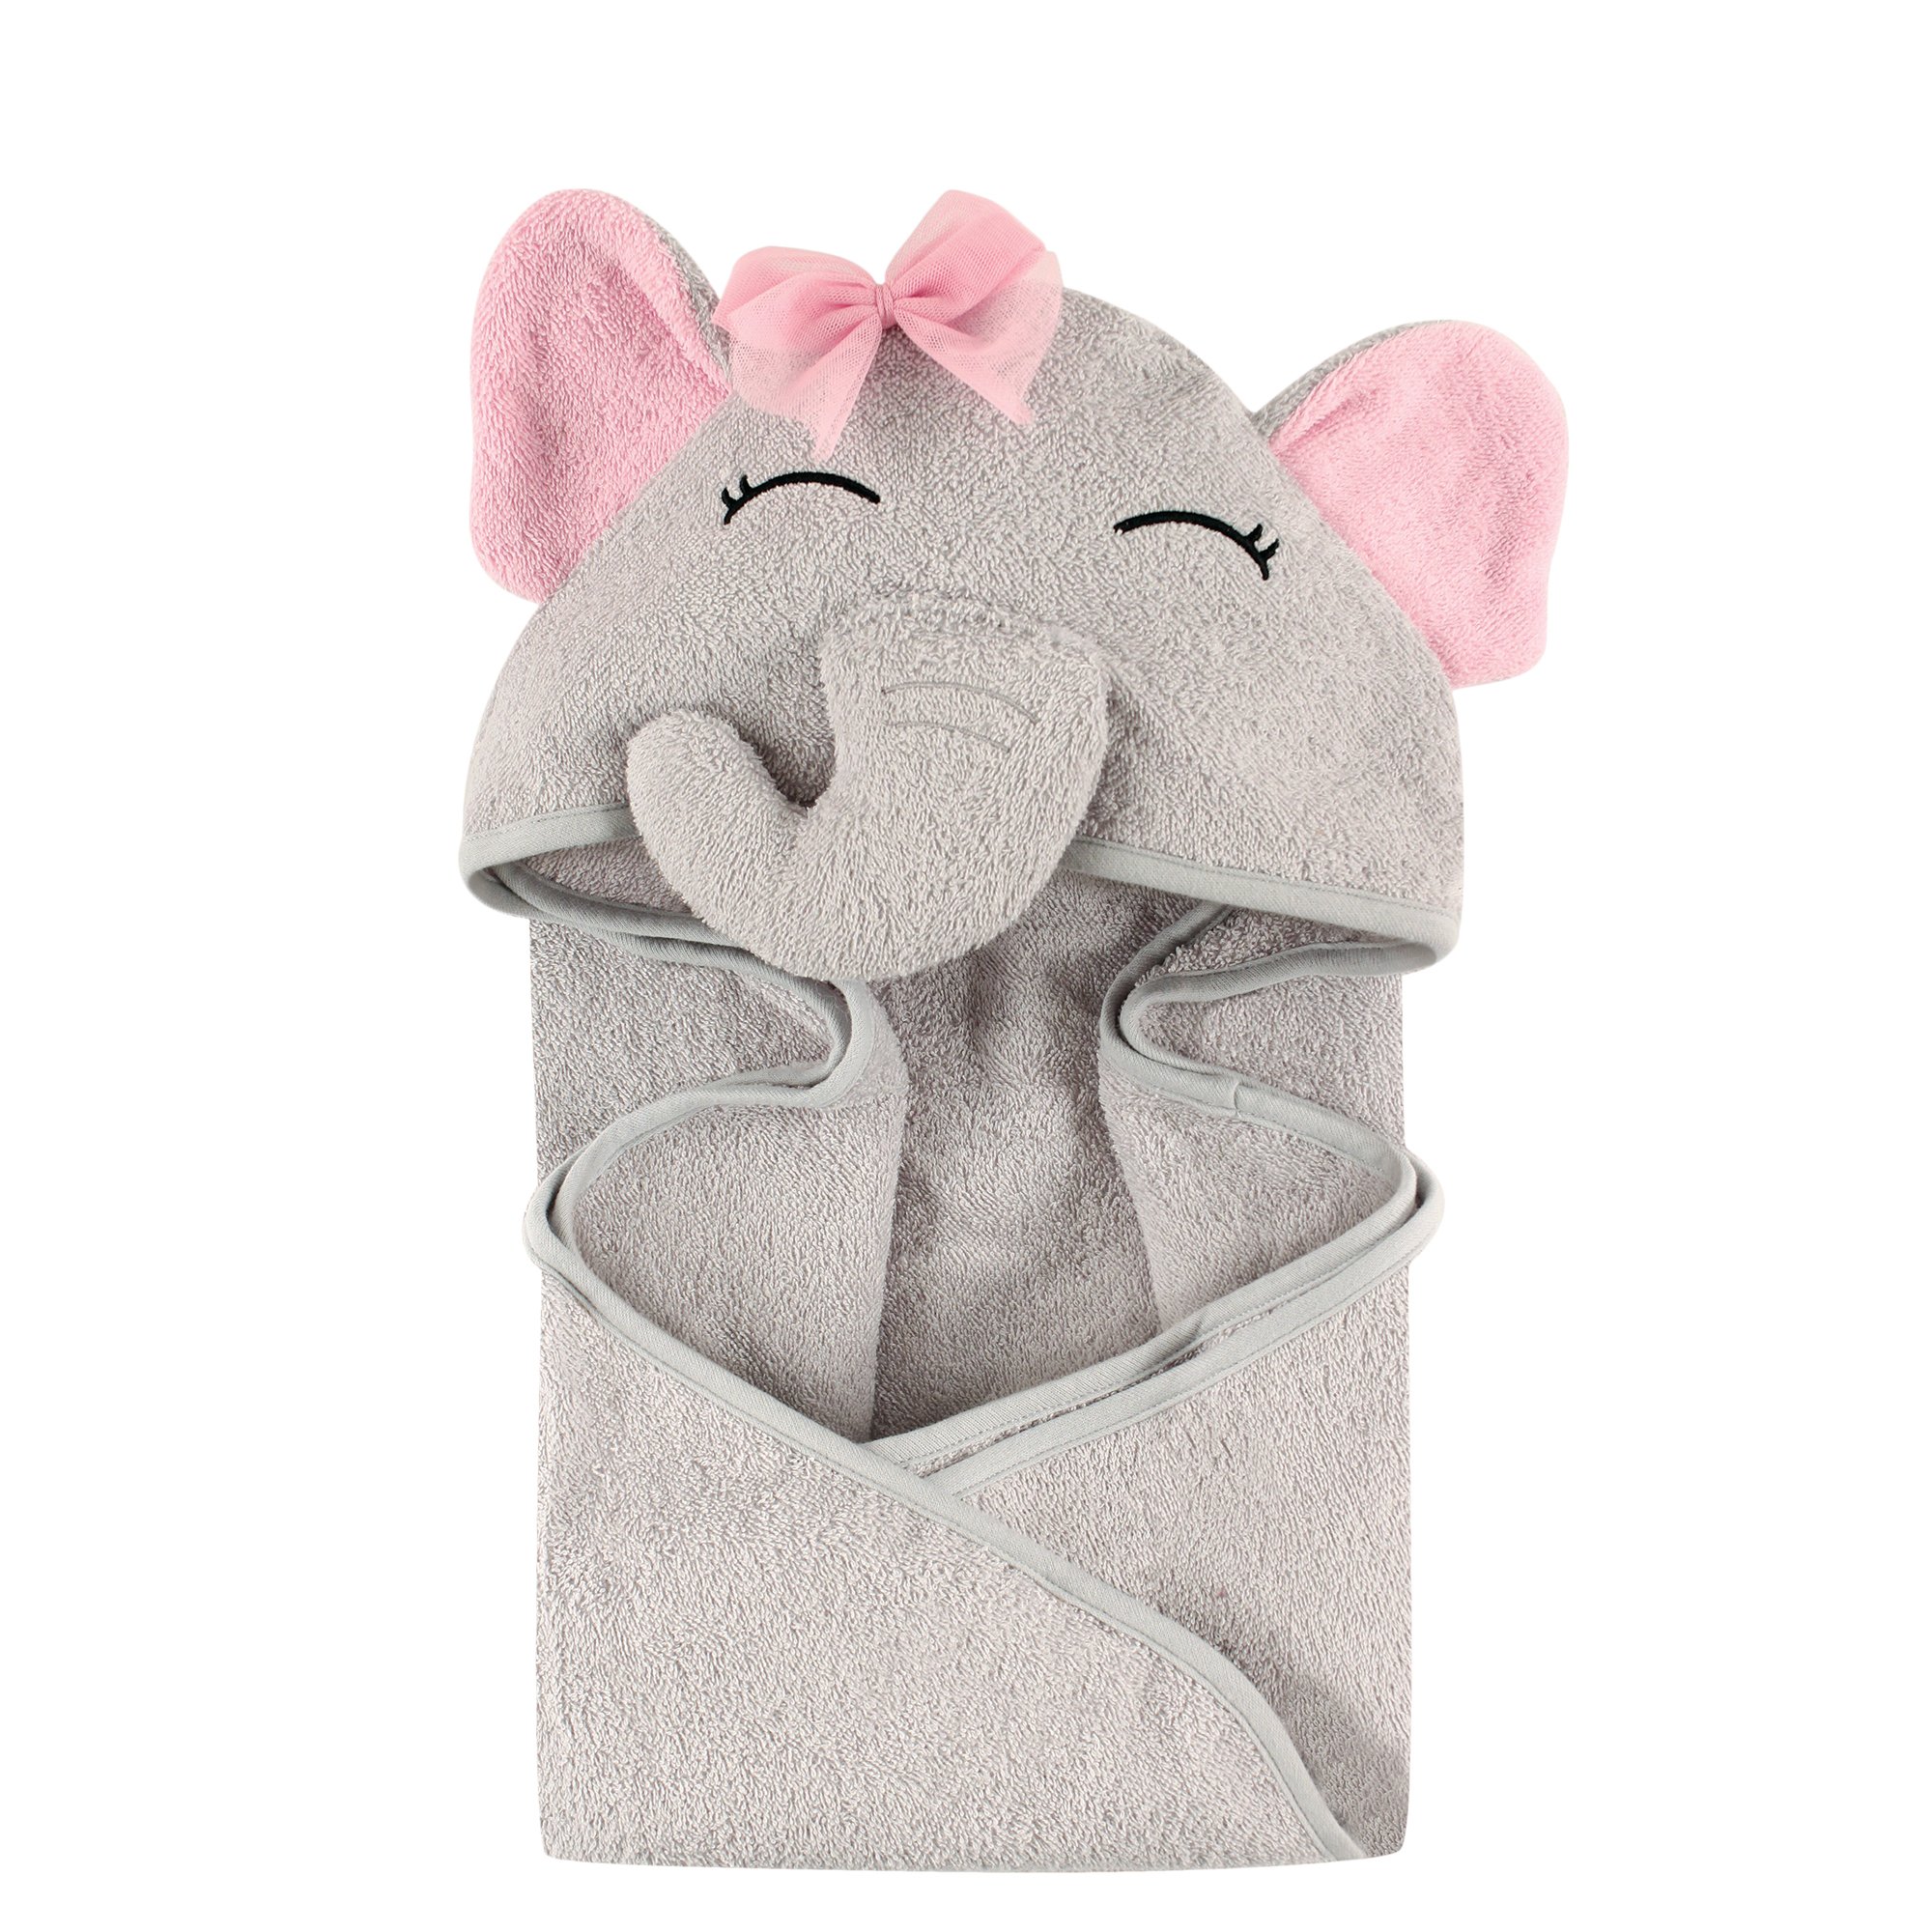 Hudson Baby Unisex Baby Animal Face Hooded Towel, Pretty Elephant 1-Pack, One Size